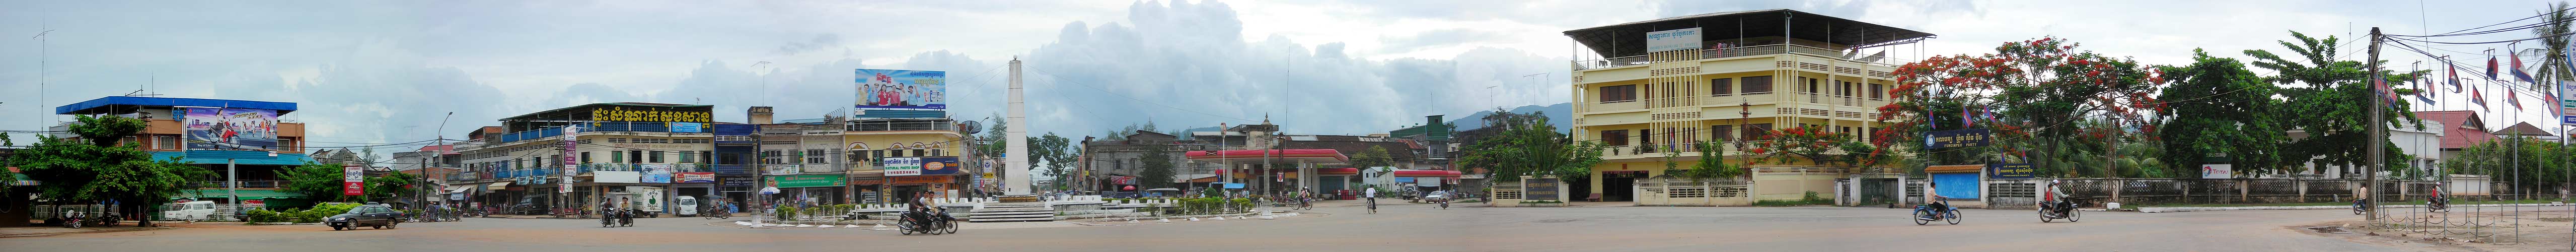 the traffice circle in downtown kampot, cambodia